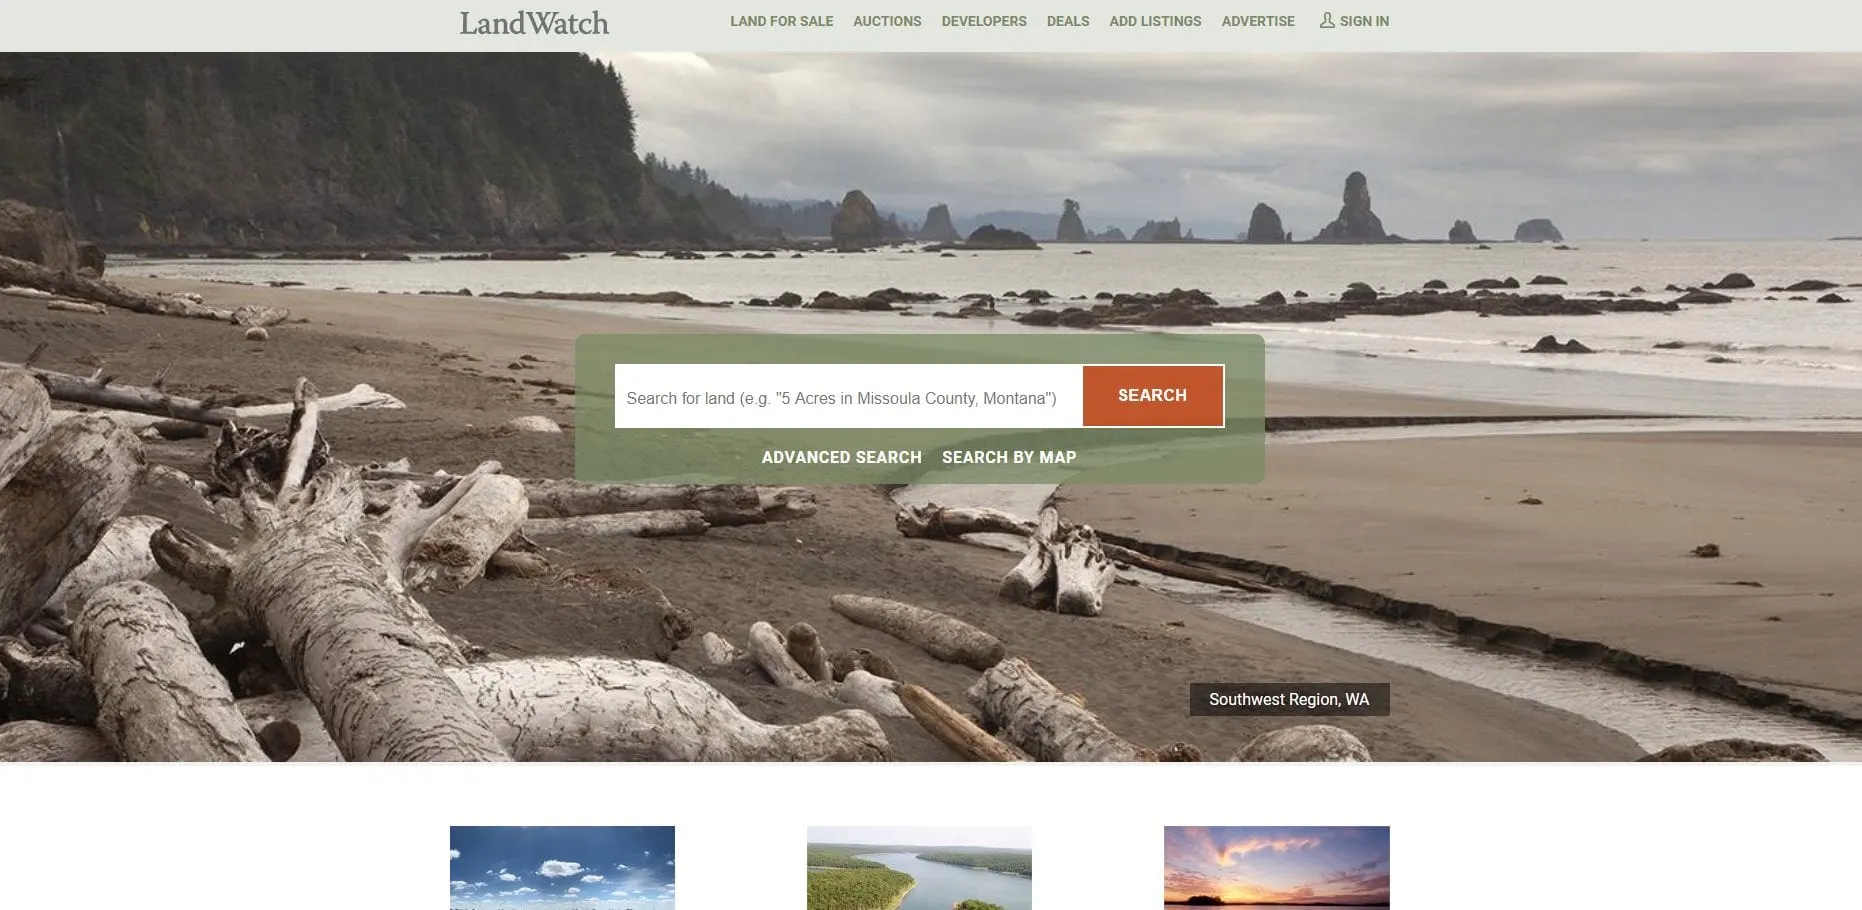 Screenshot of the LandWatch home page